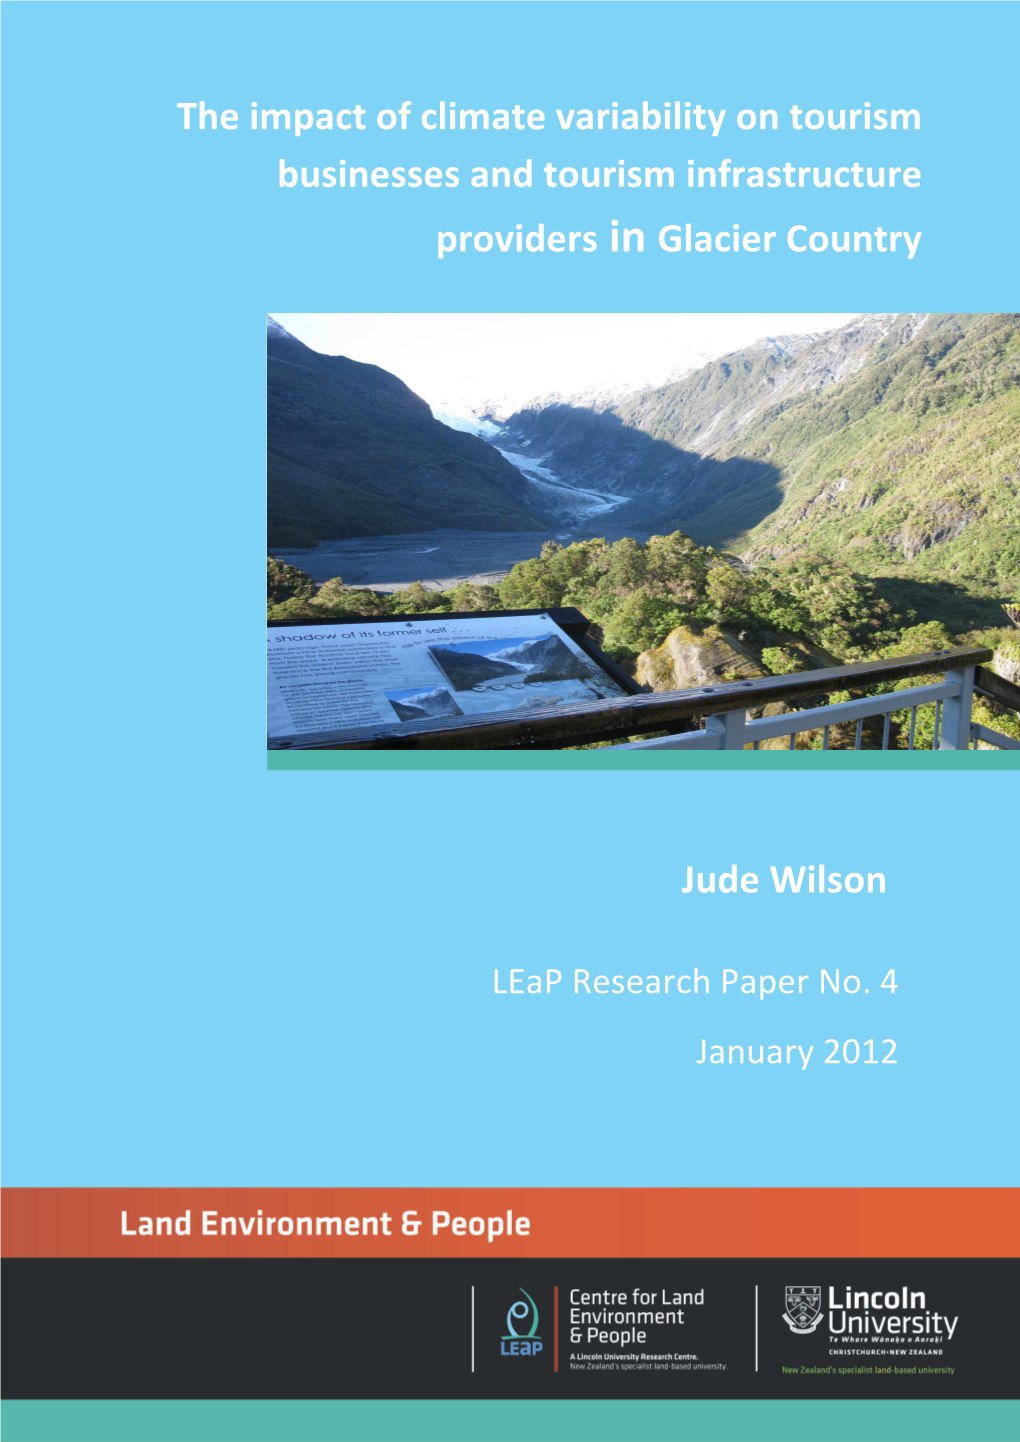 The Impact of Climate Variability on Tourism Businesses and Tourism Infrastructure Providers in Glacier Country